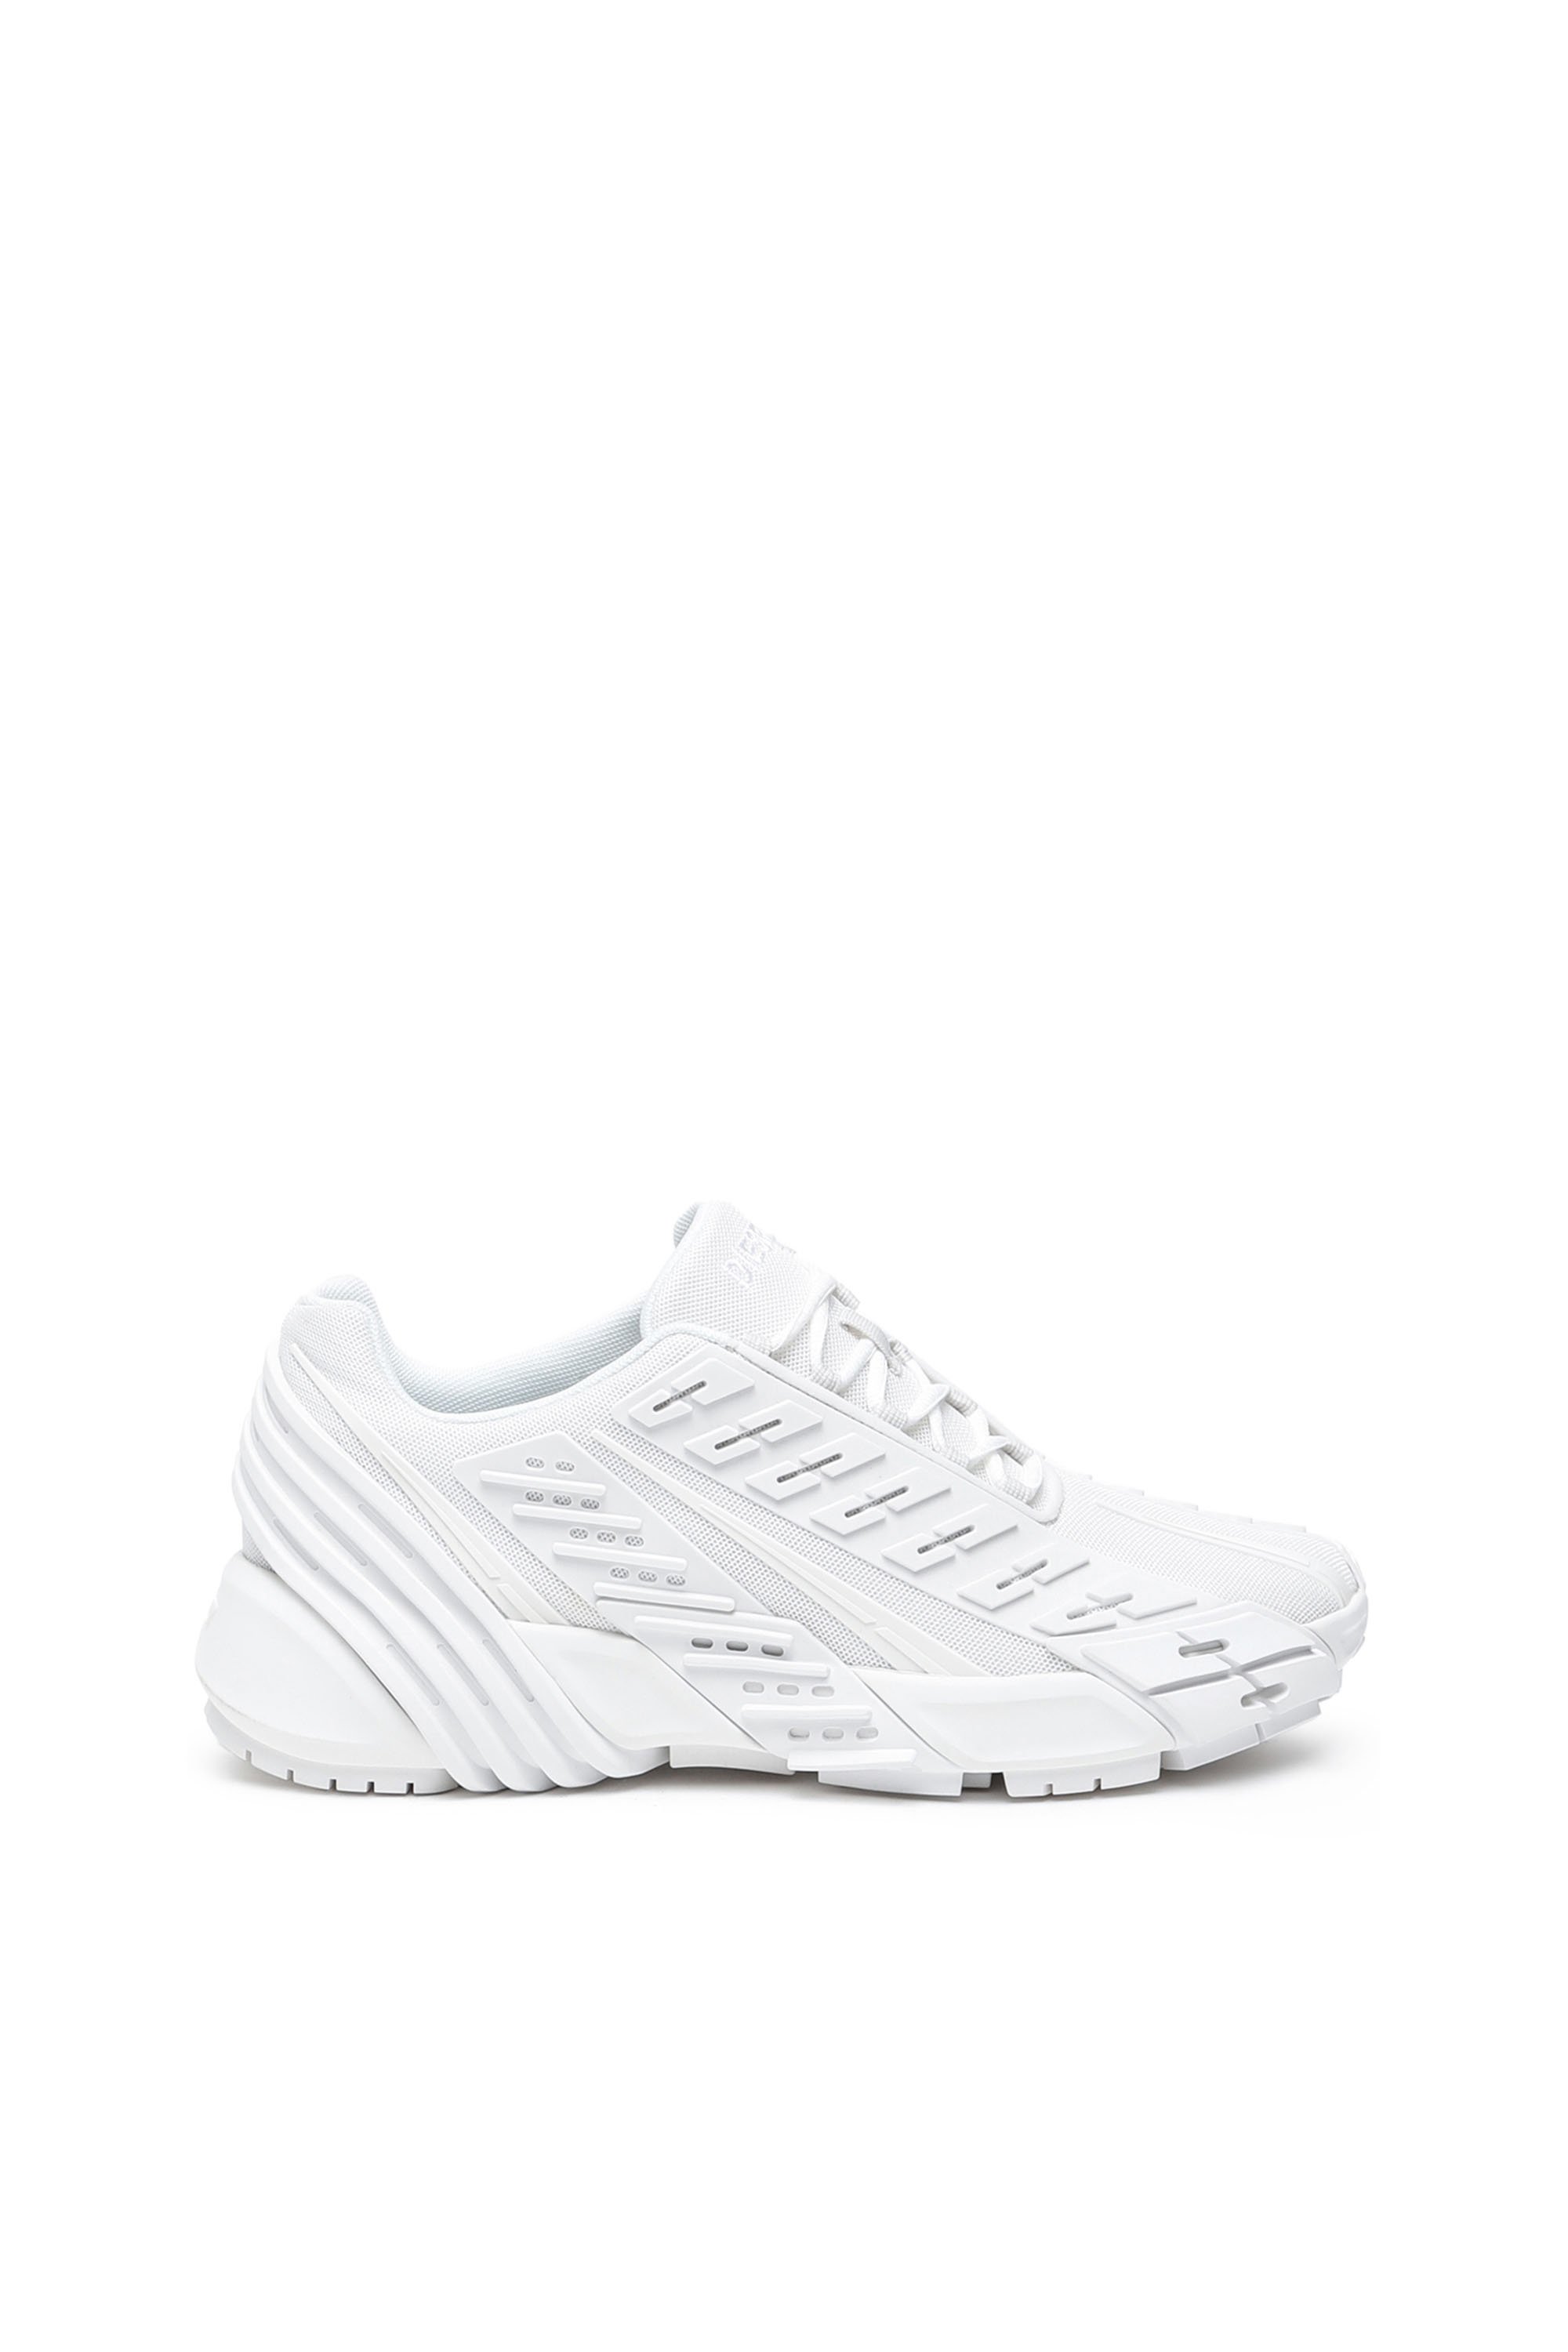 Diesel - S-Prototype Low W - Sneakers in mesh and rubber - Sneakers - Woman - White